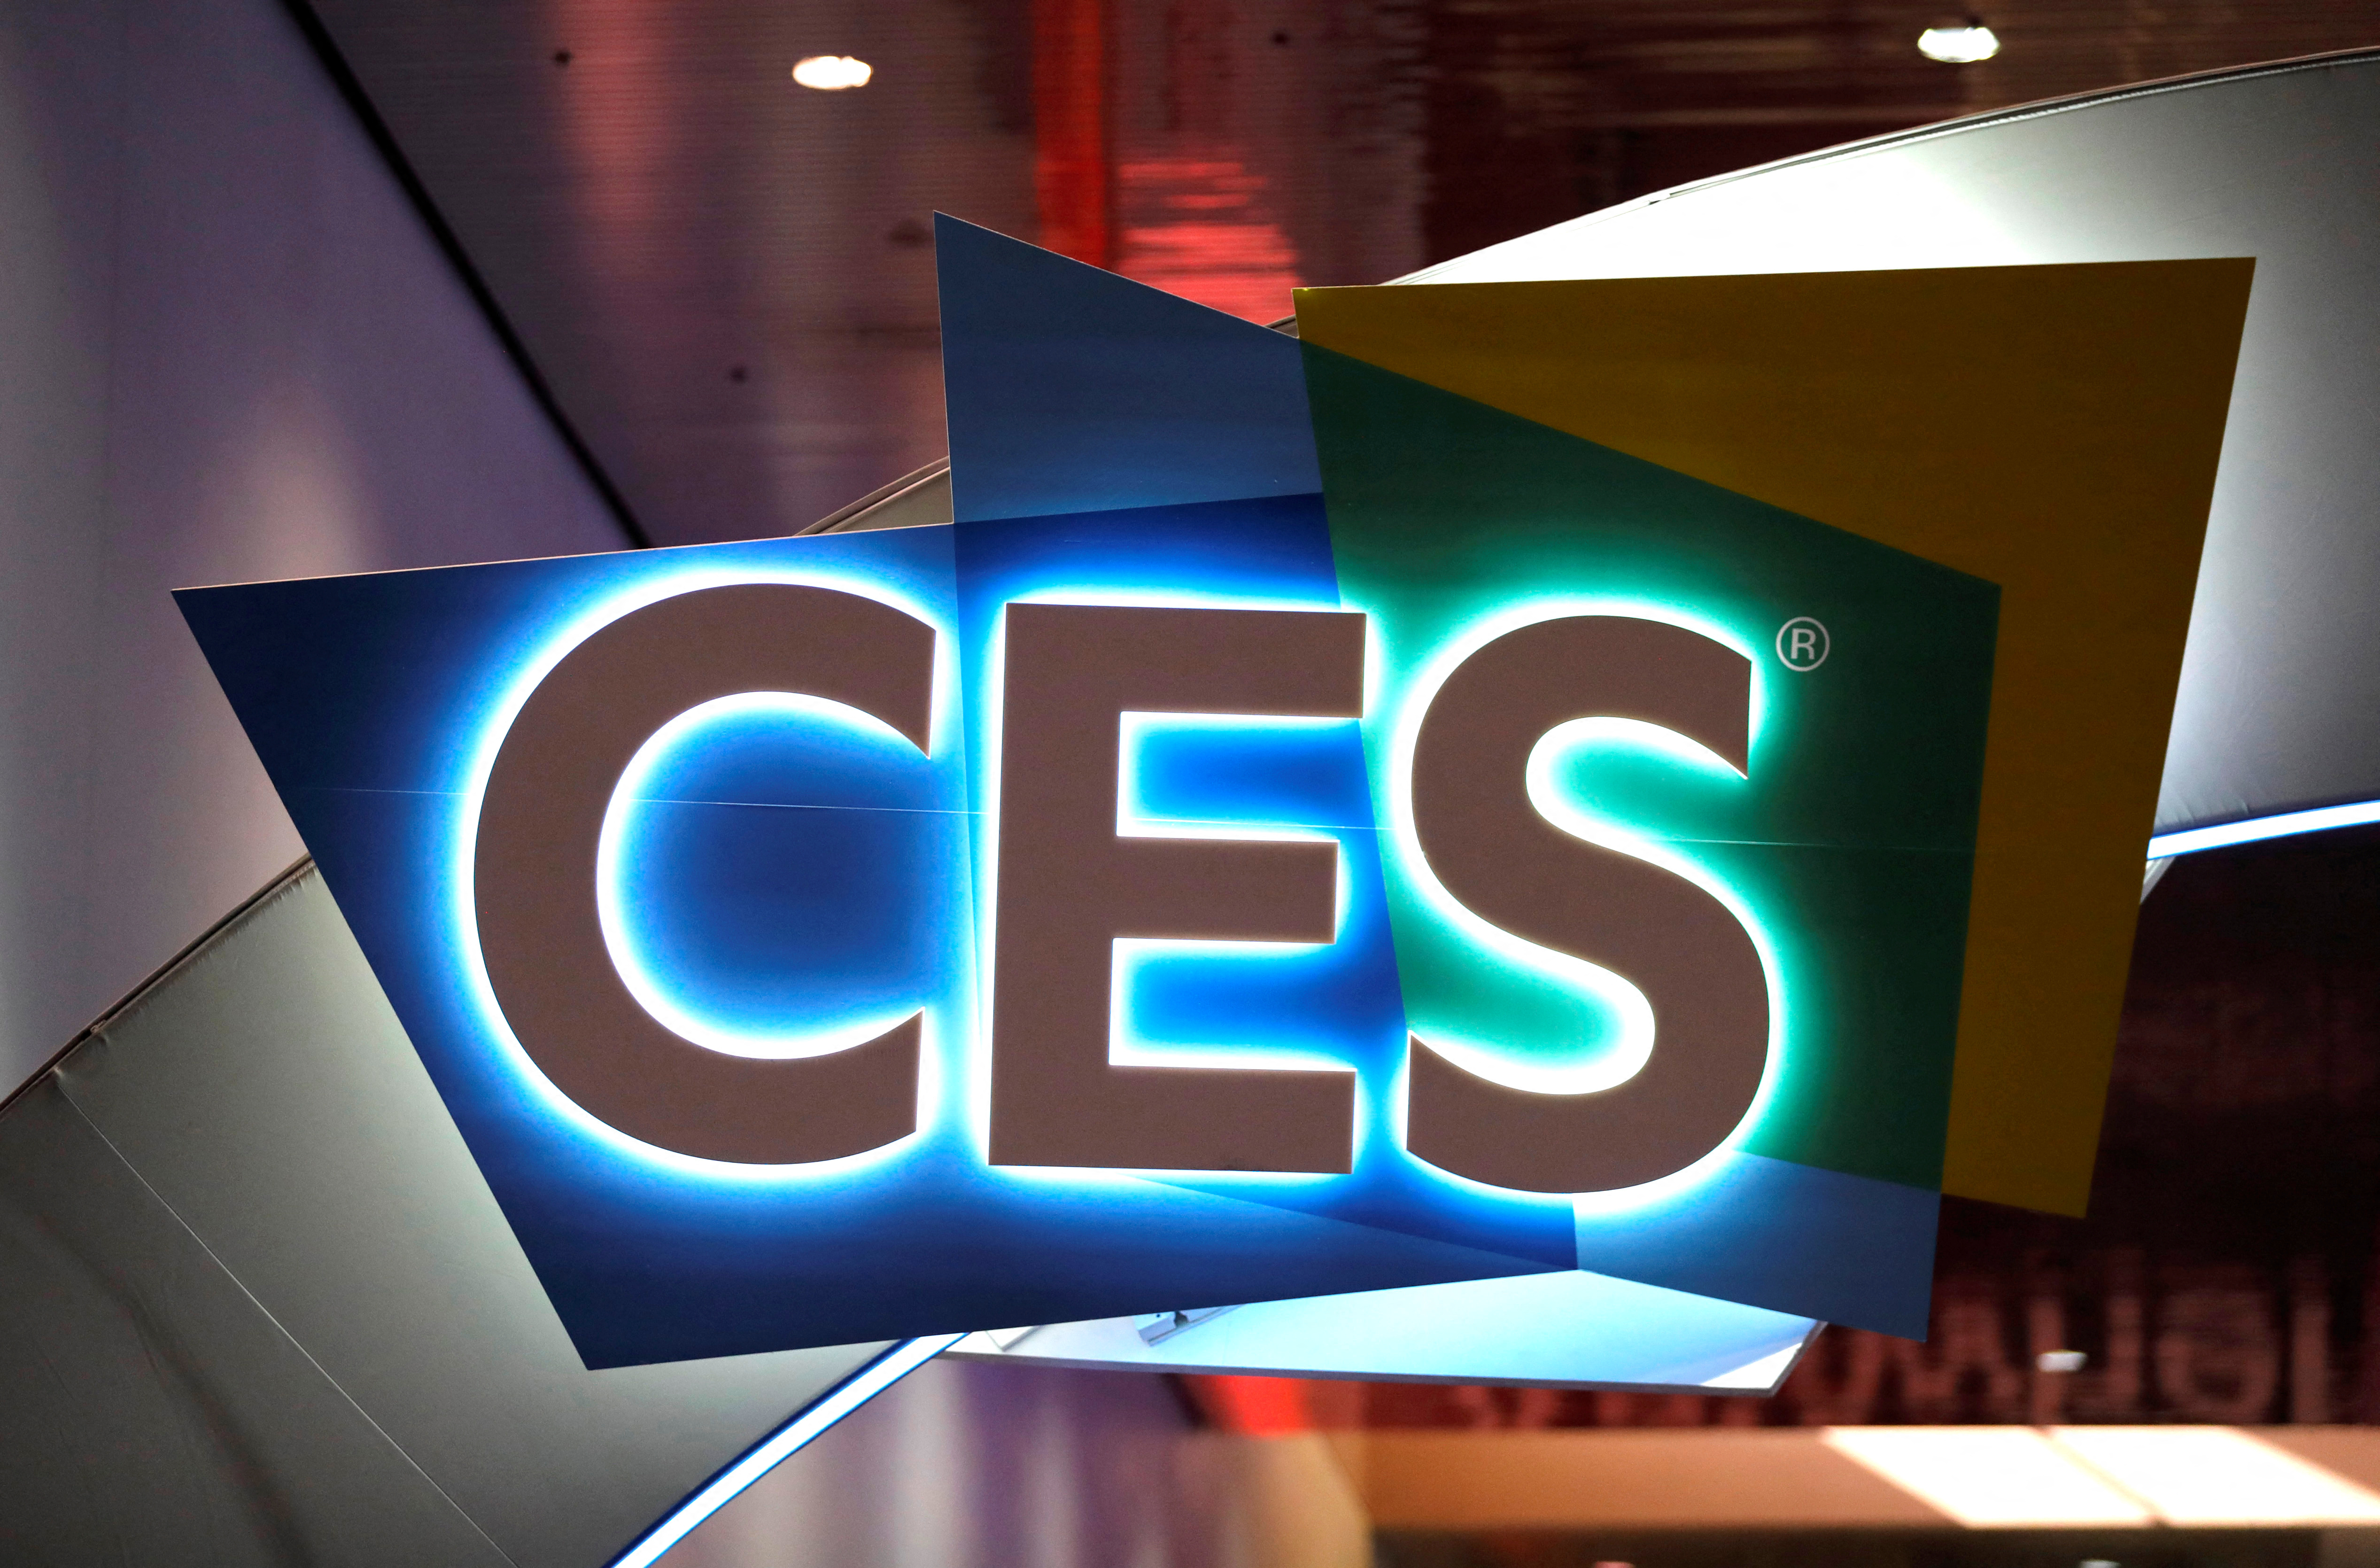 The CES logo is displayed in the lobby of the Las Vegas Convention Center in Las Vegas